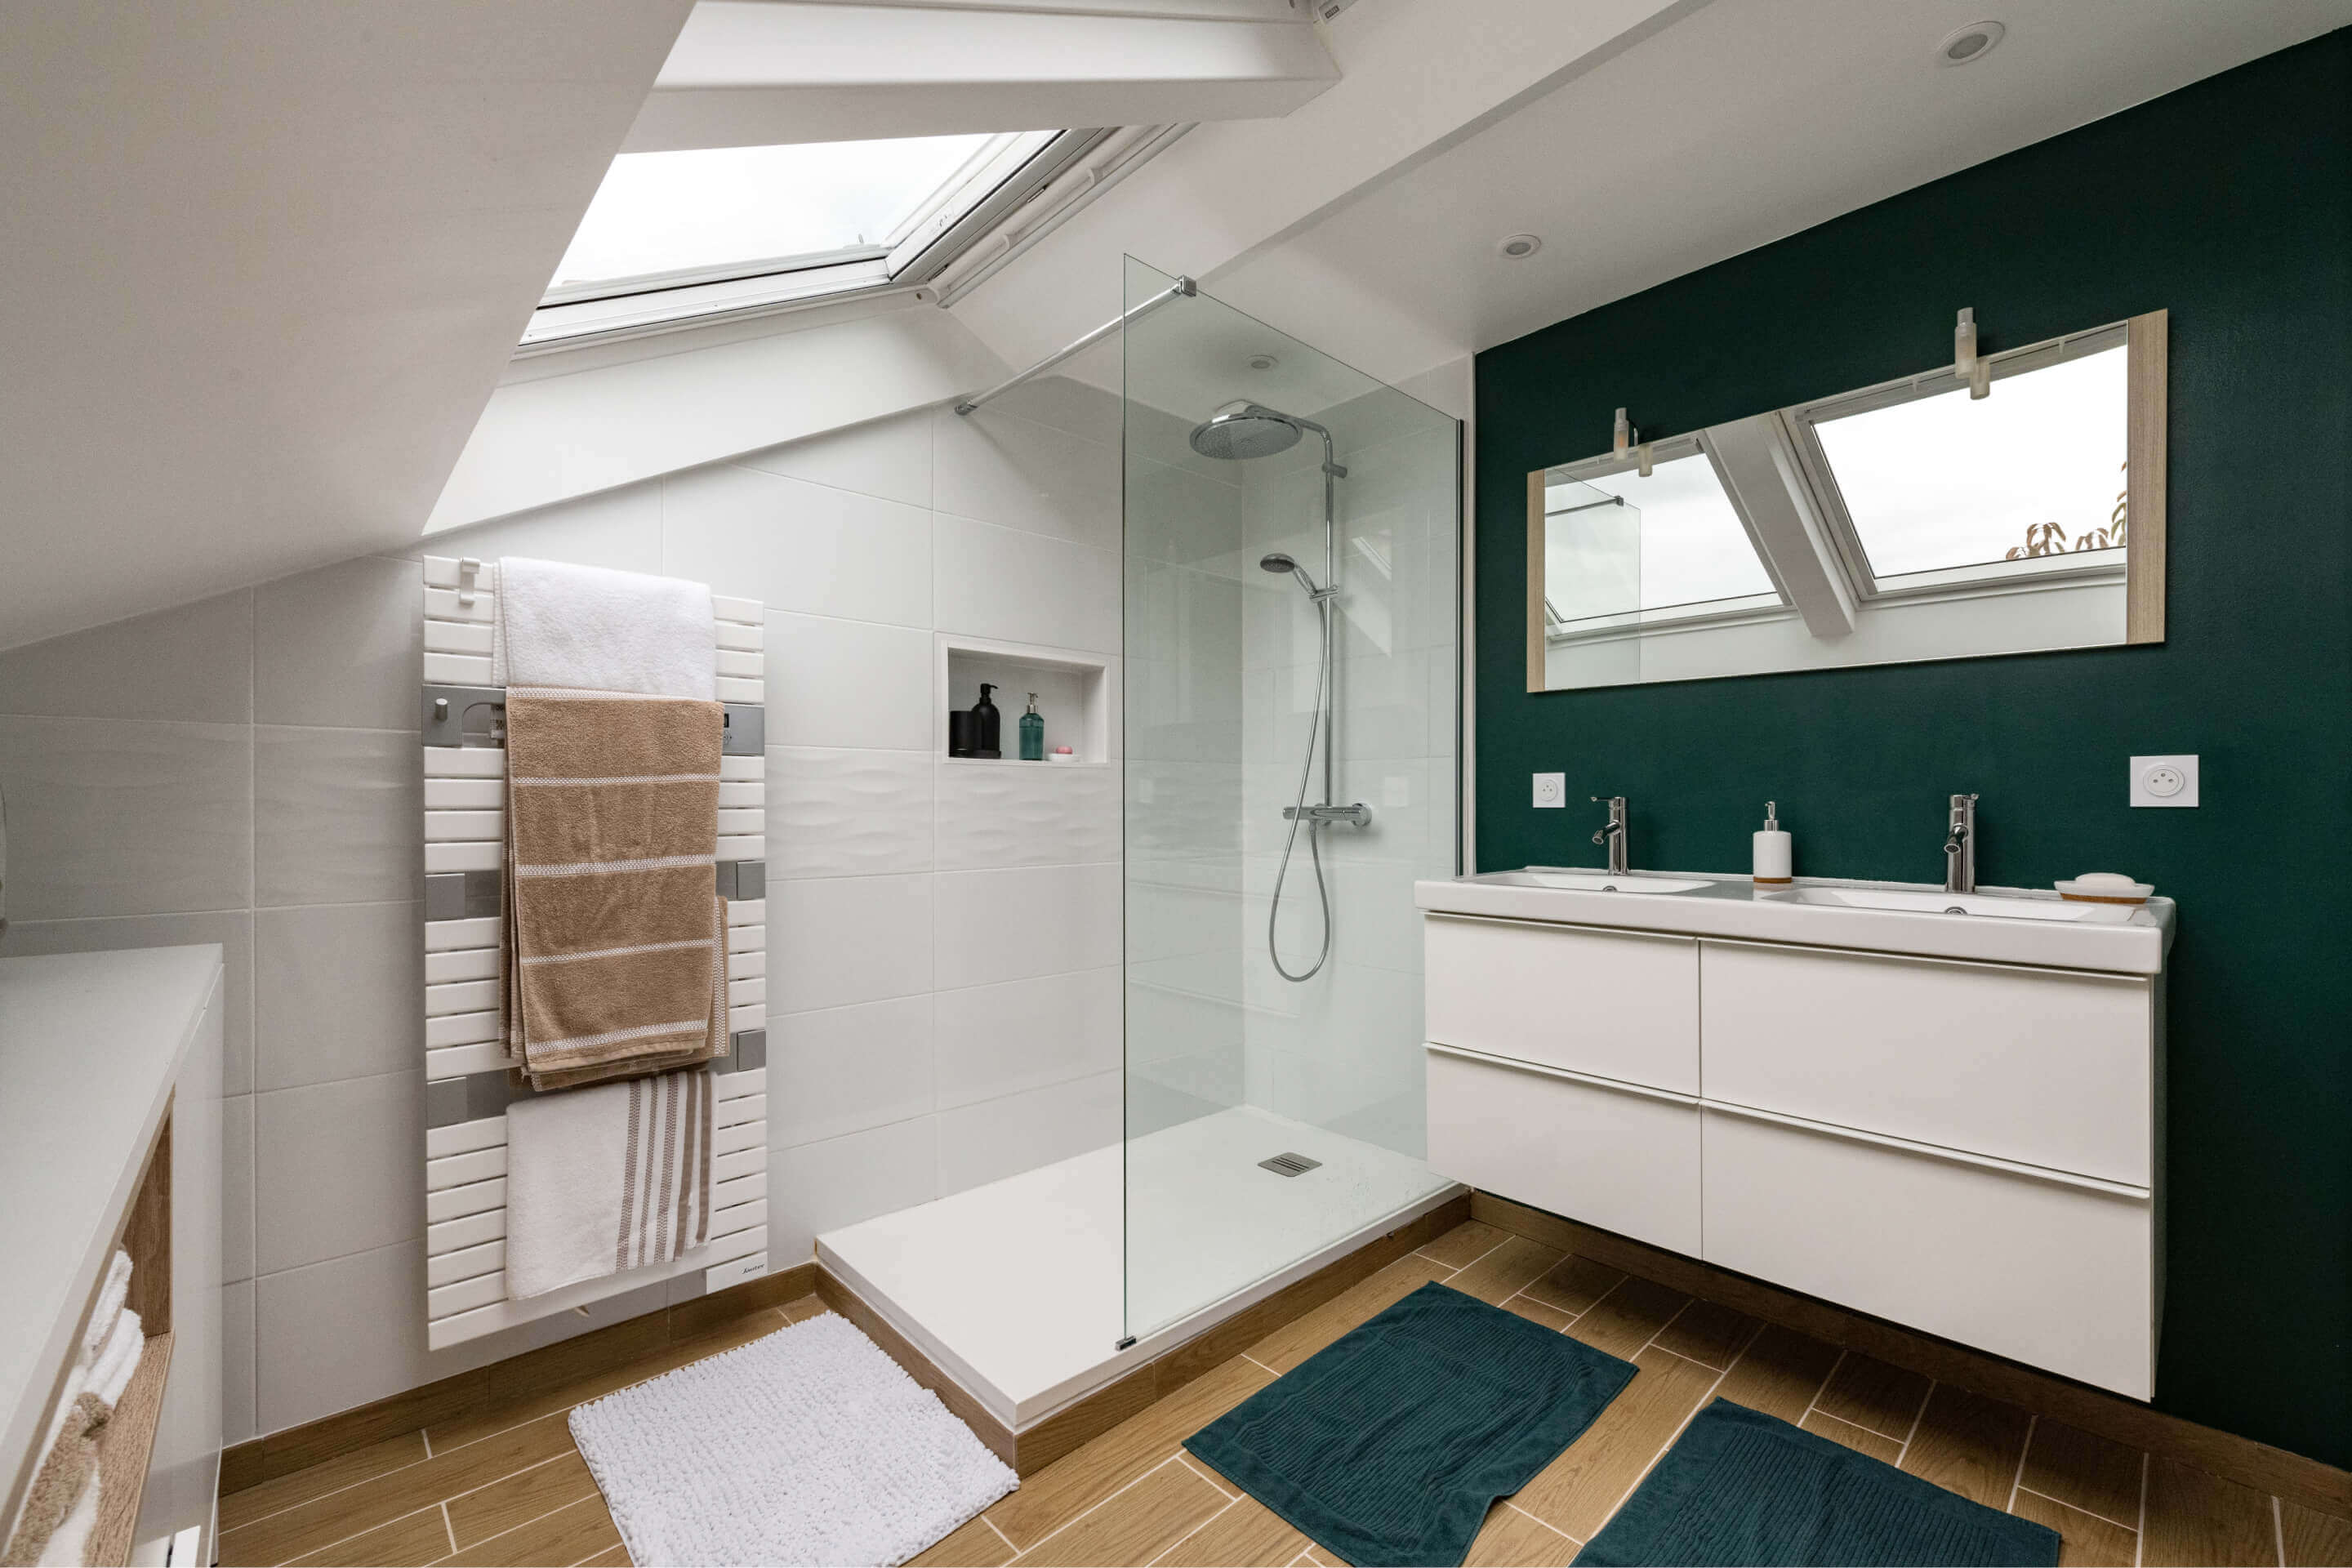 Bathroom area with sink and shower and also roof windows